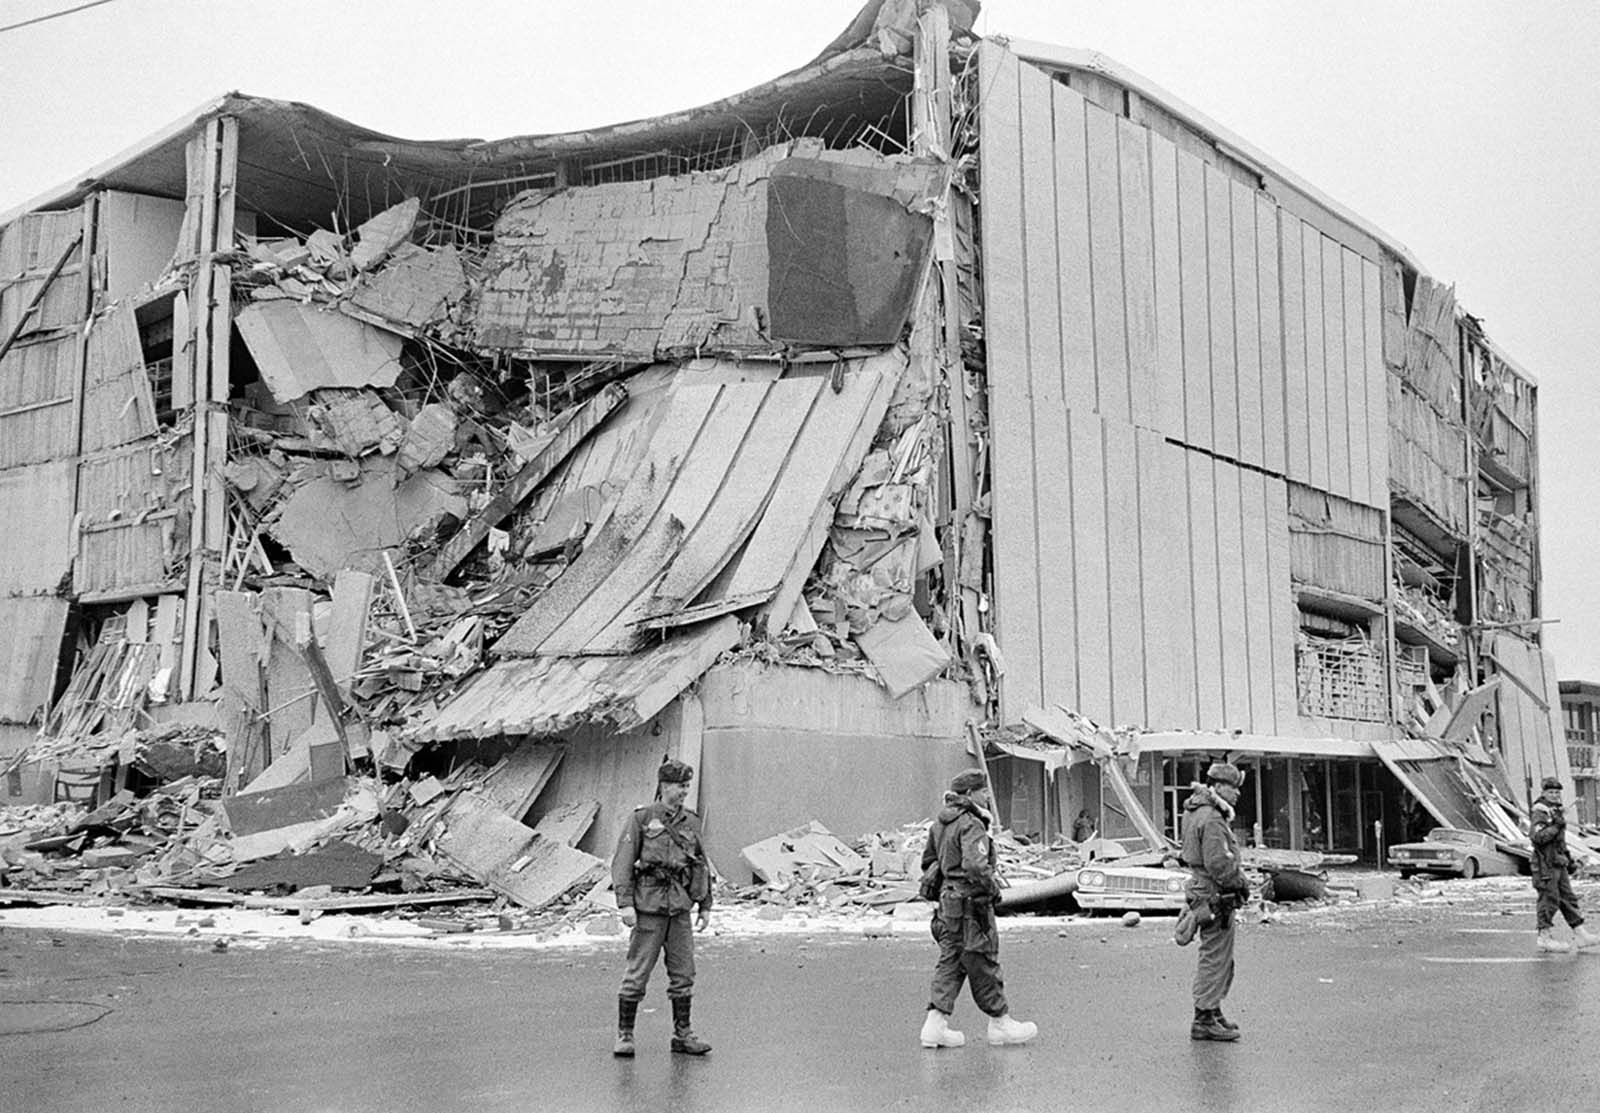 With the city under martial law, soldiers patrol a downtown street in Anchorage, Alaska, on March 28, 1964. In background is the wreckage of the five-story J.C. Penney's store at Fifth Avenue and D Street.